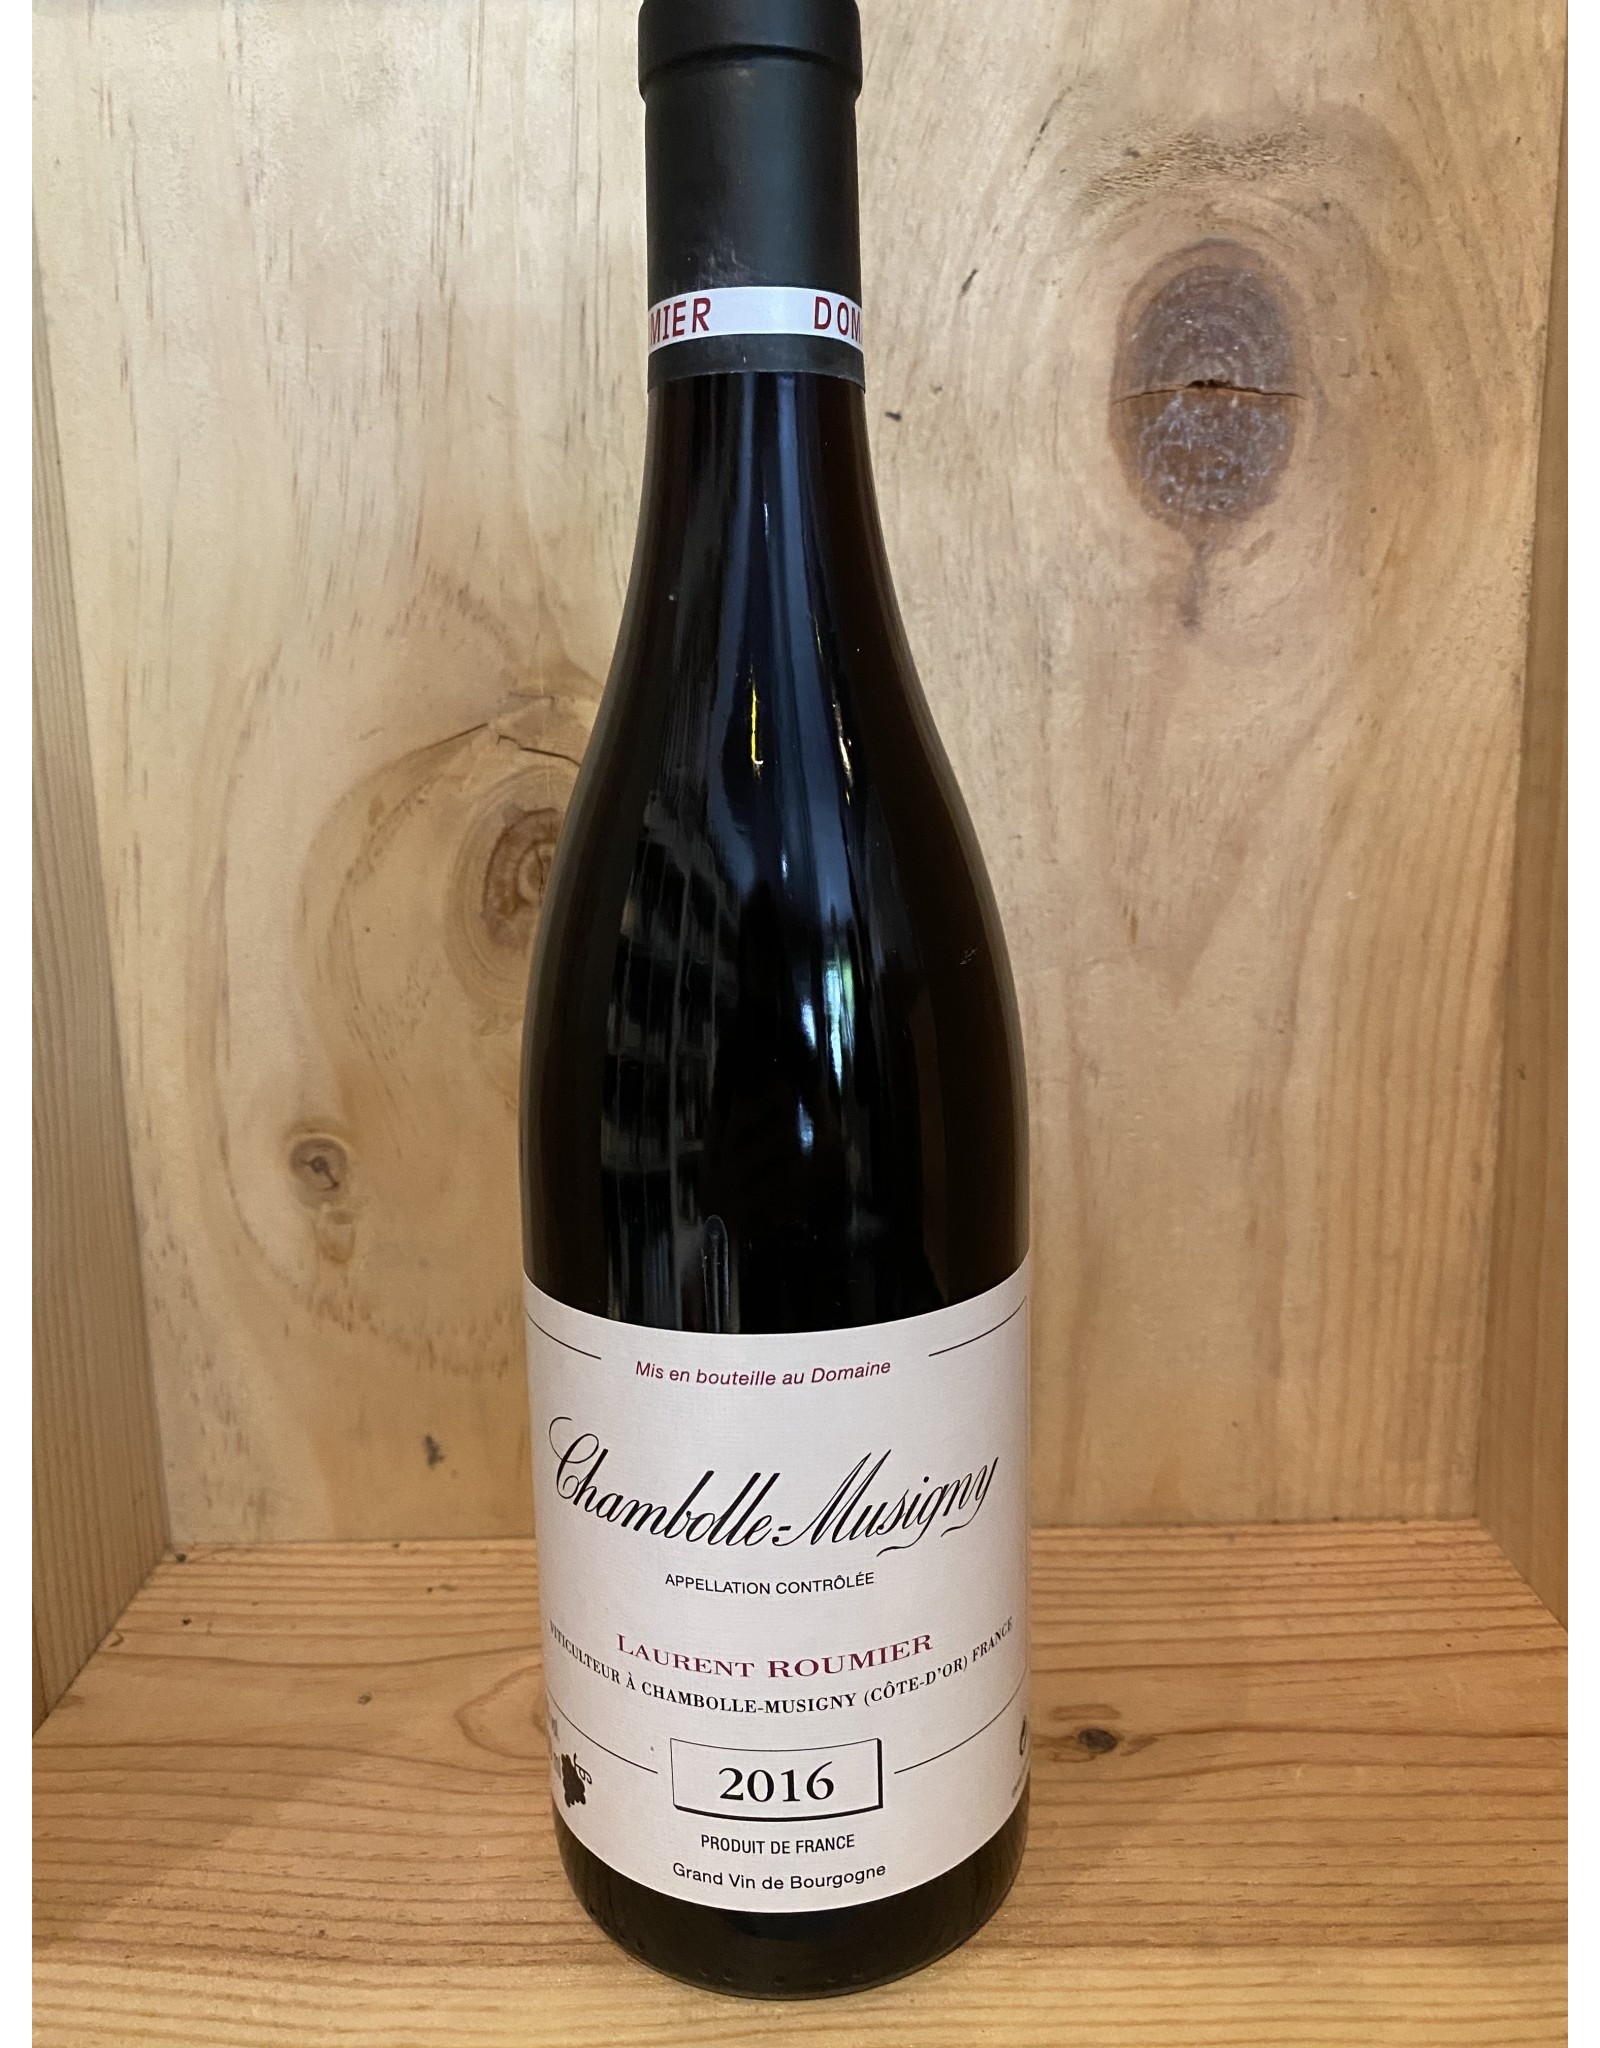 R Burgundy, Chambolle-Musigny, Laurent Roumier 2016